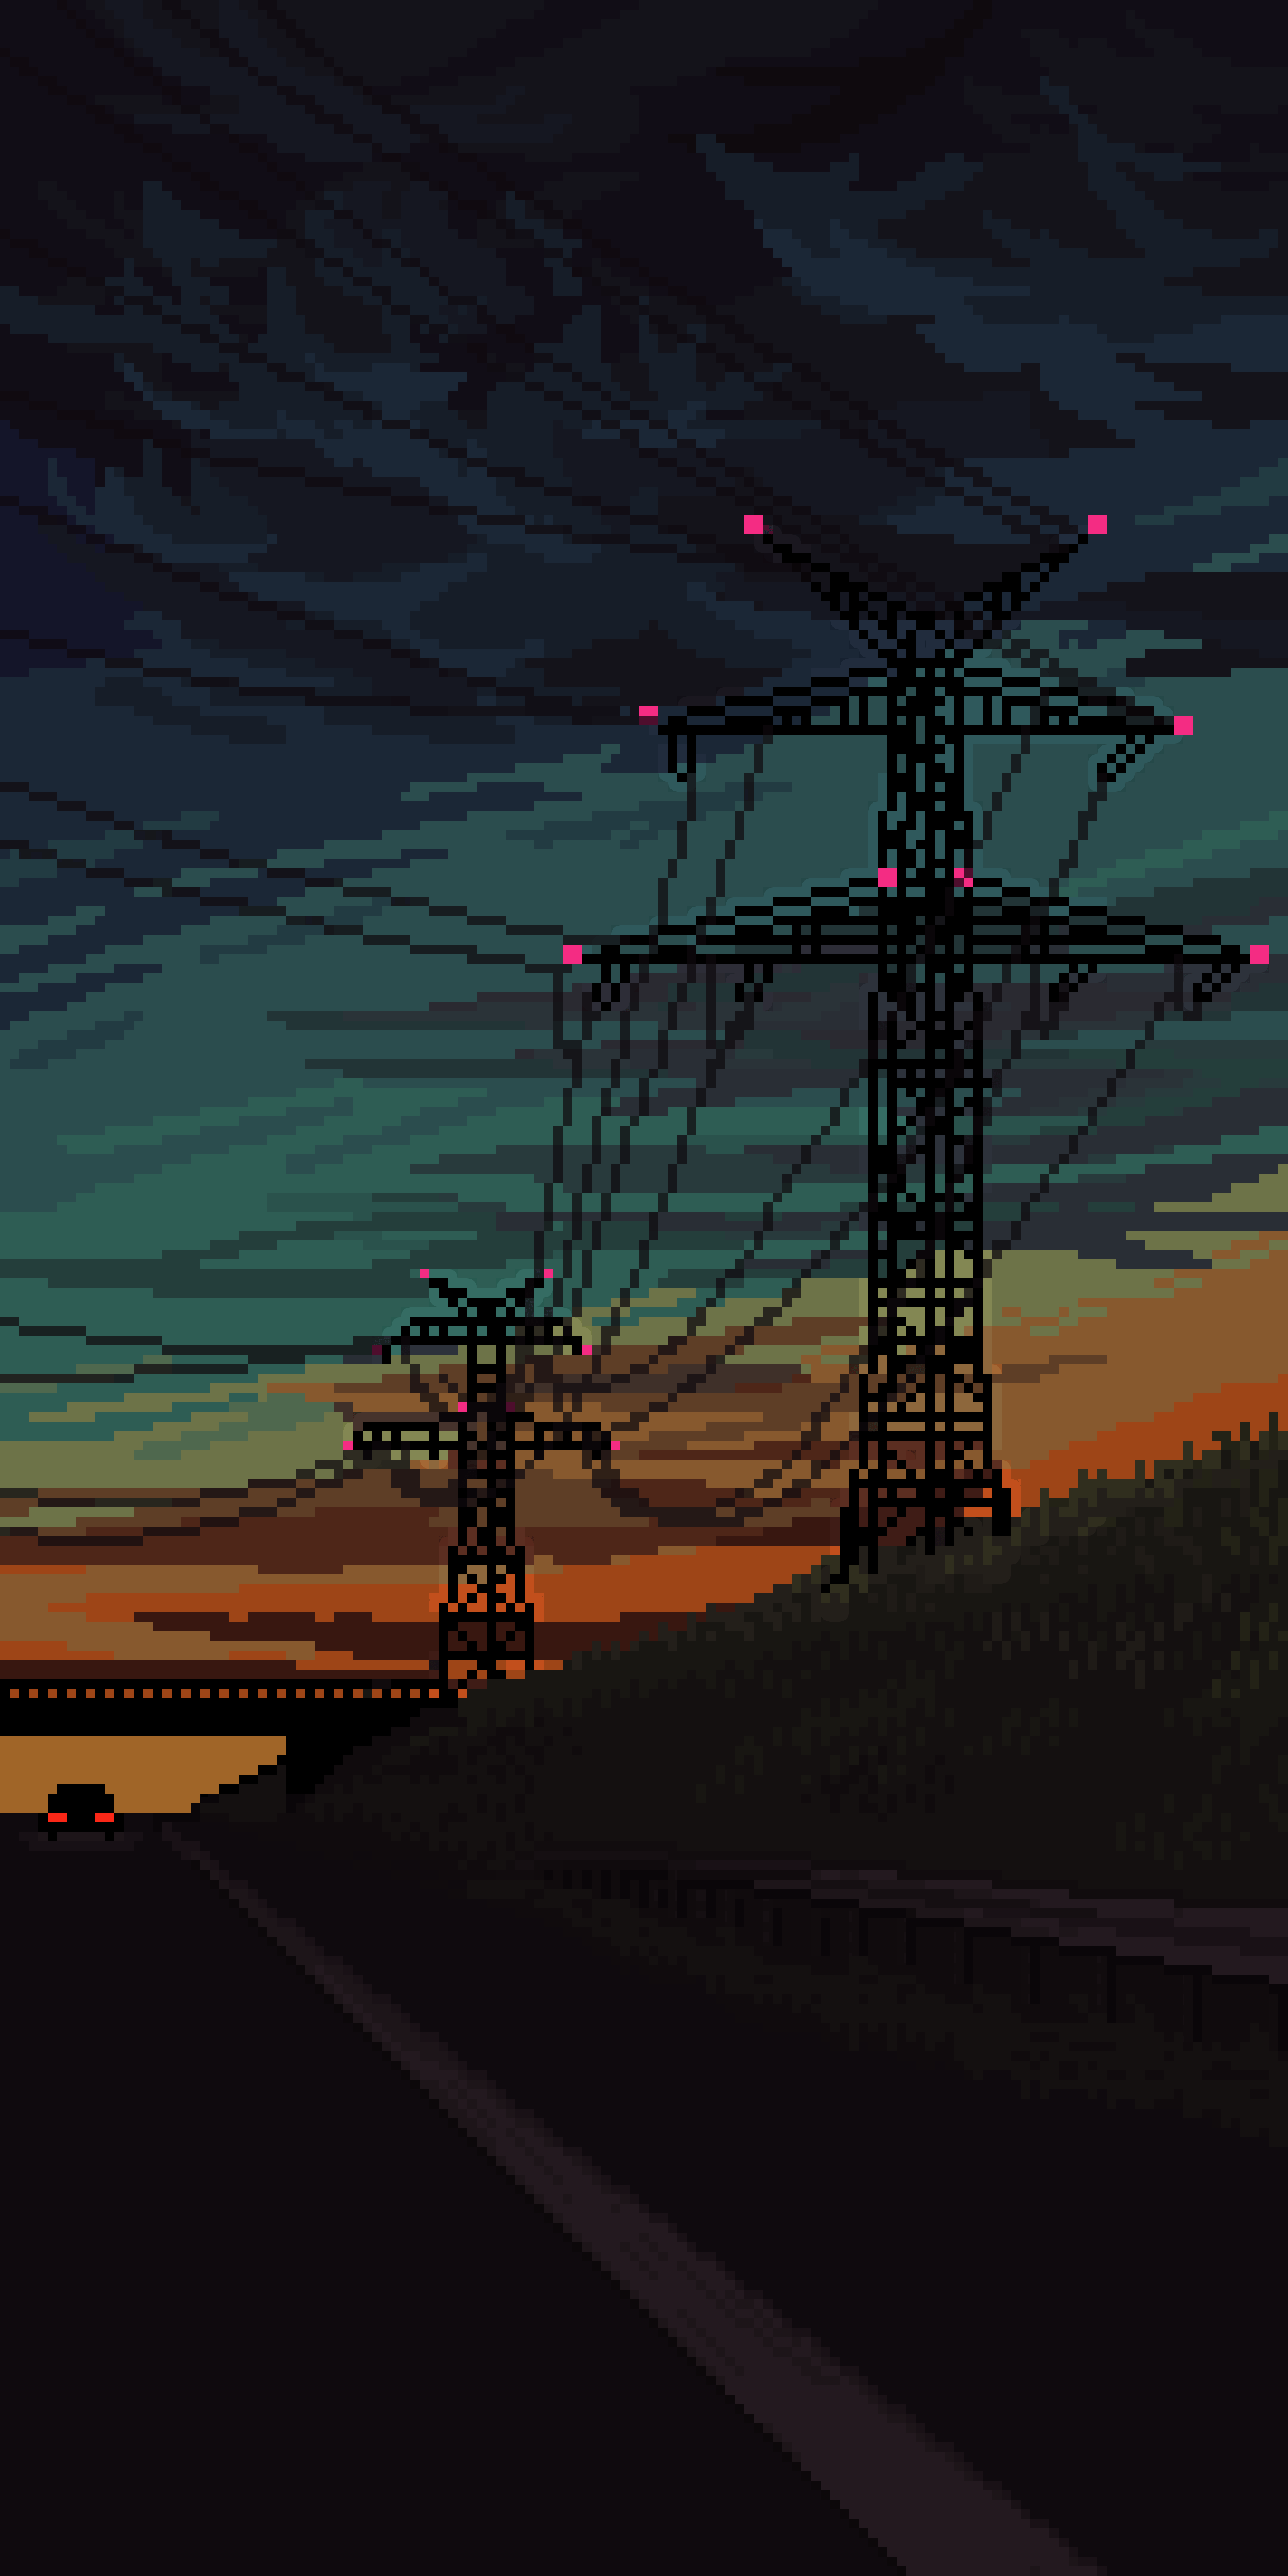 A road with some power lines and trees - Pixel art